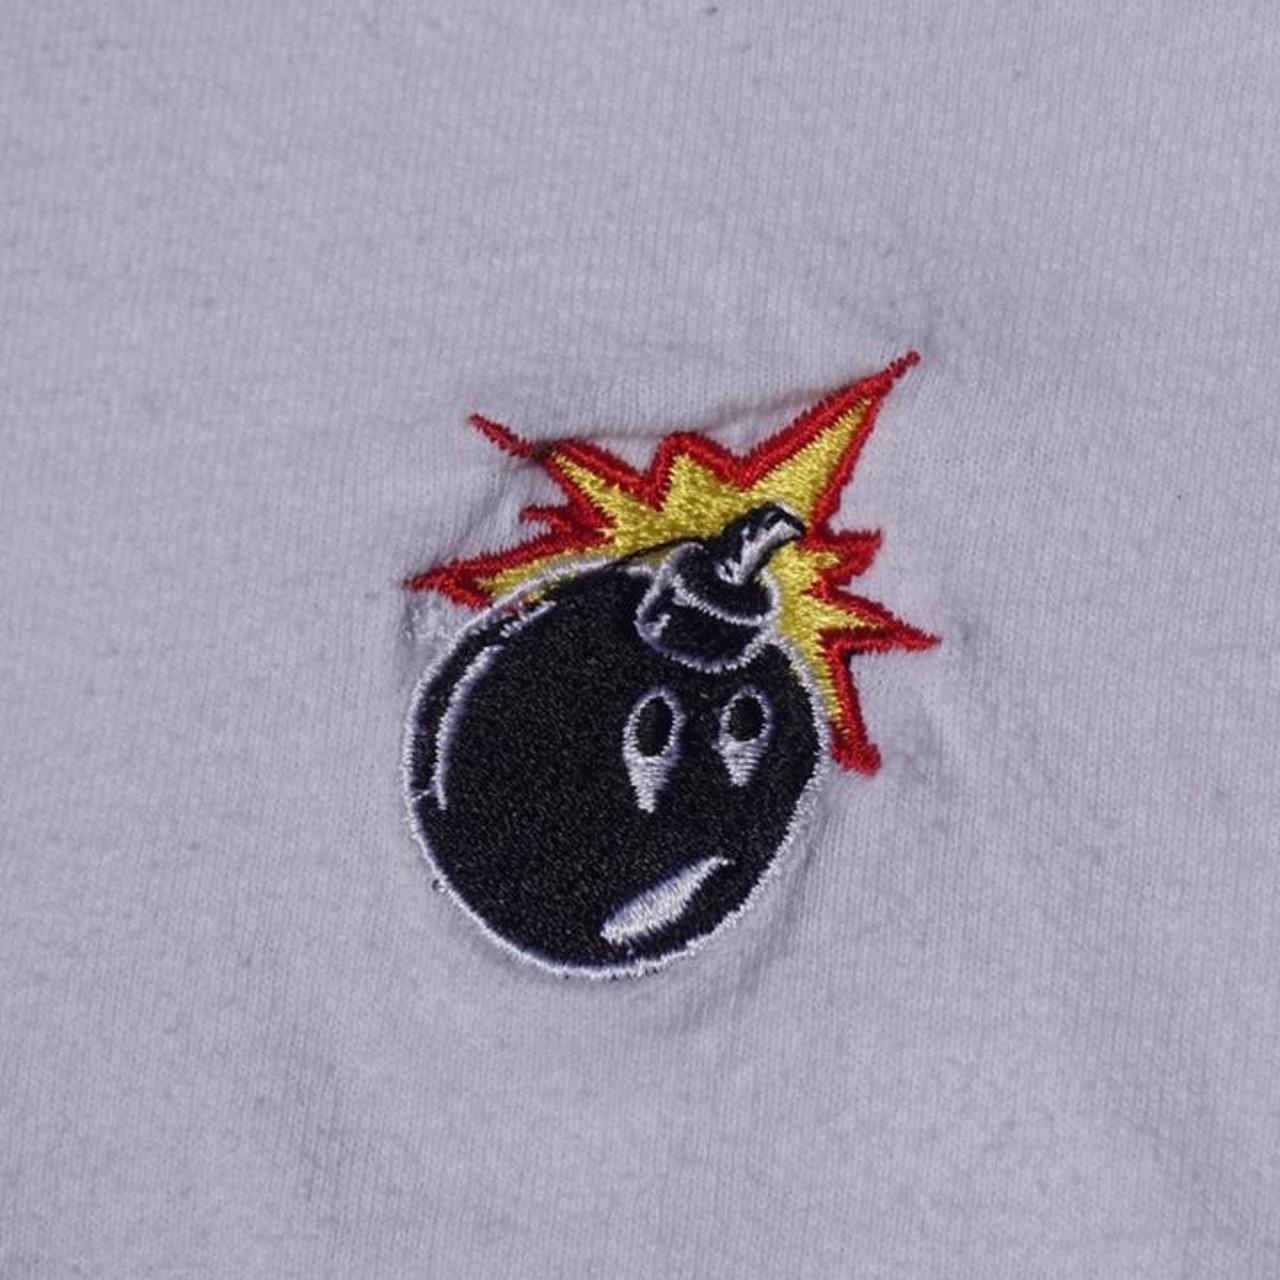 Product Image 3 - The Hundreds Tee

Embroidered Classic Bomb